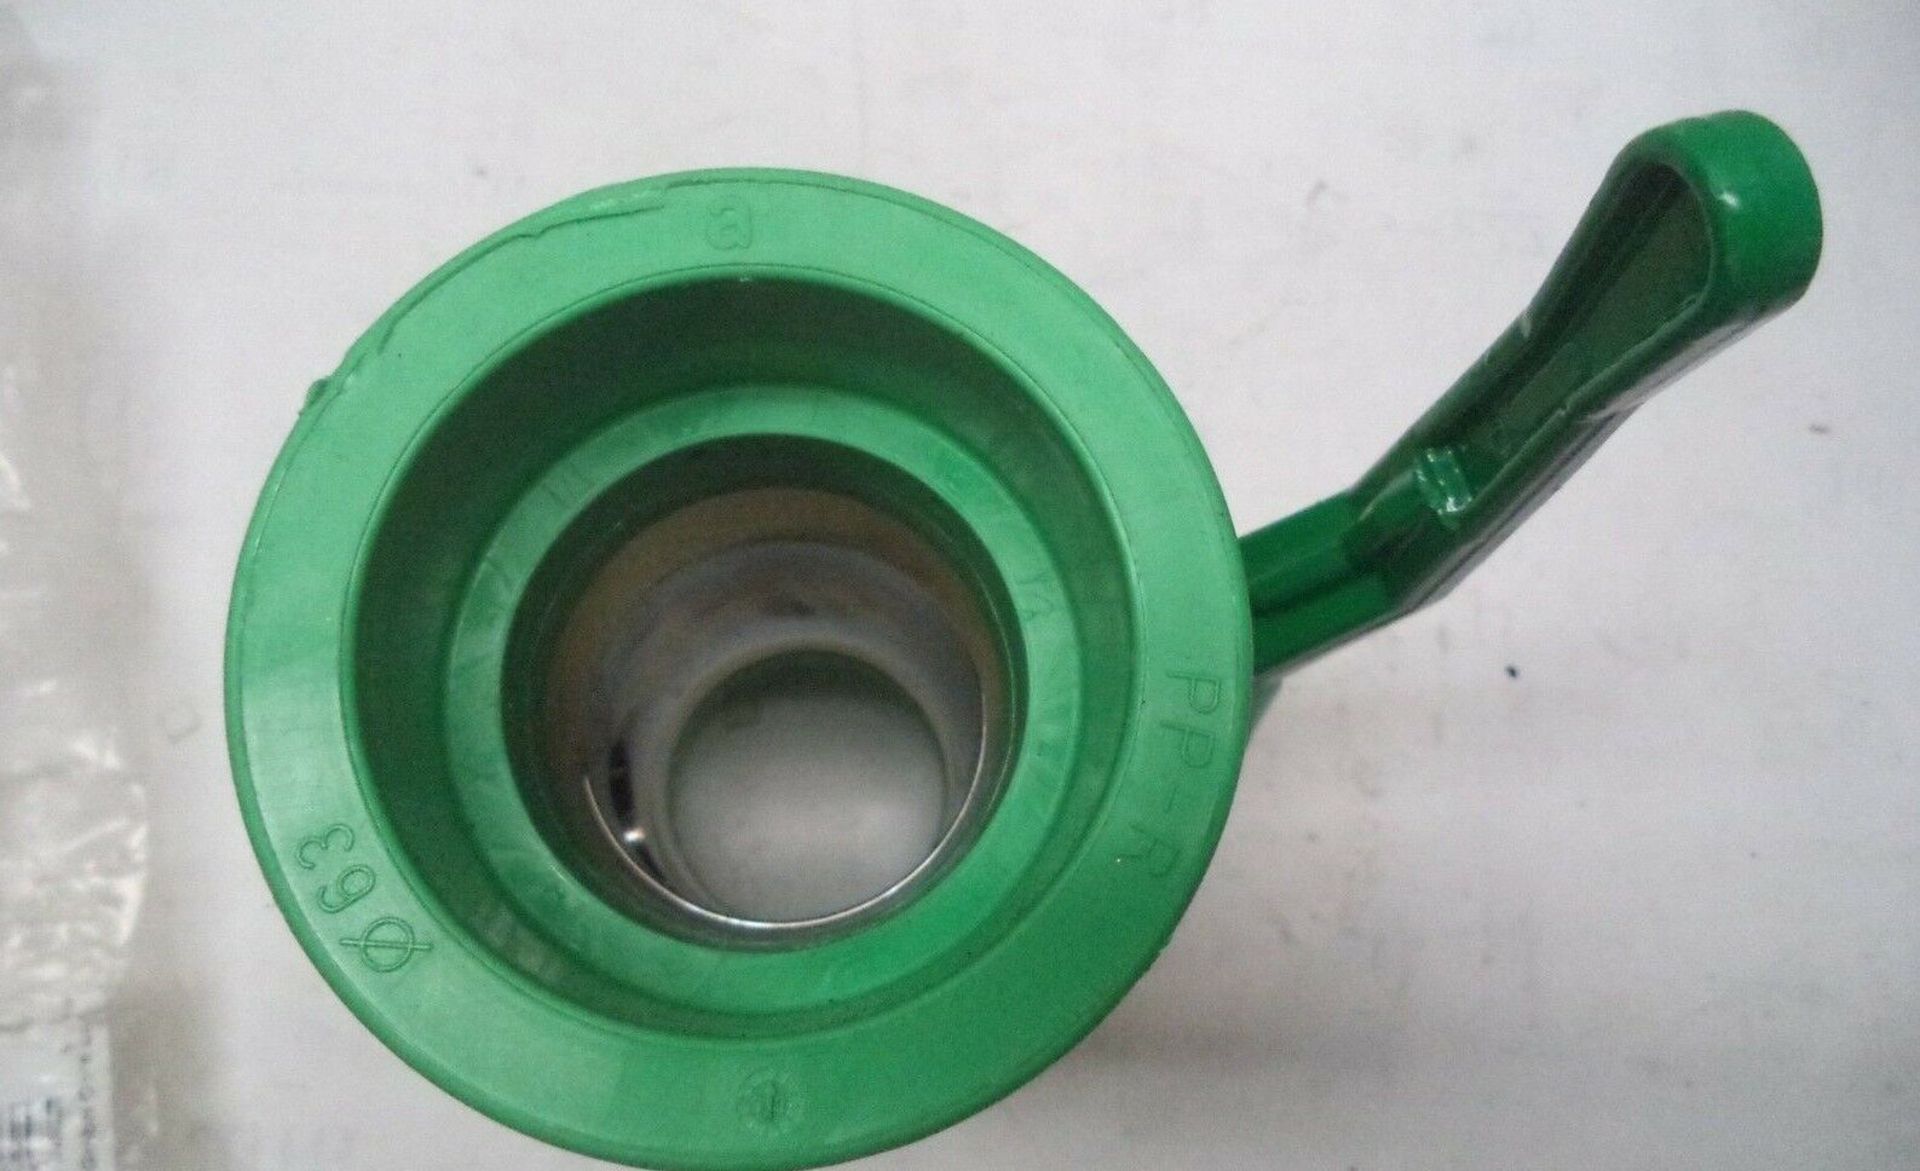 AquaTherm 63mm Ball Valve Part No. 41318 Fusiotherm Green Pipe - Image 2 of 4